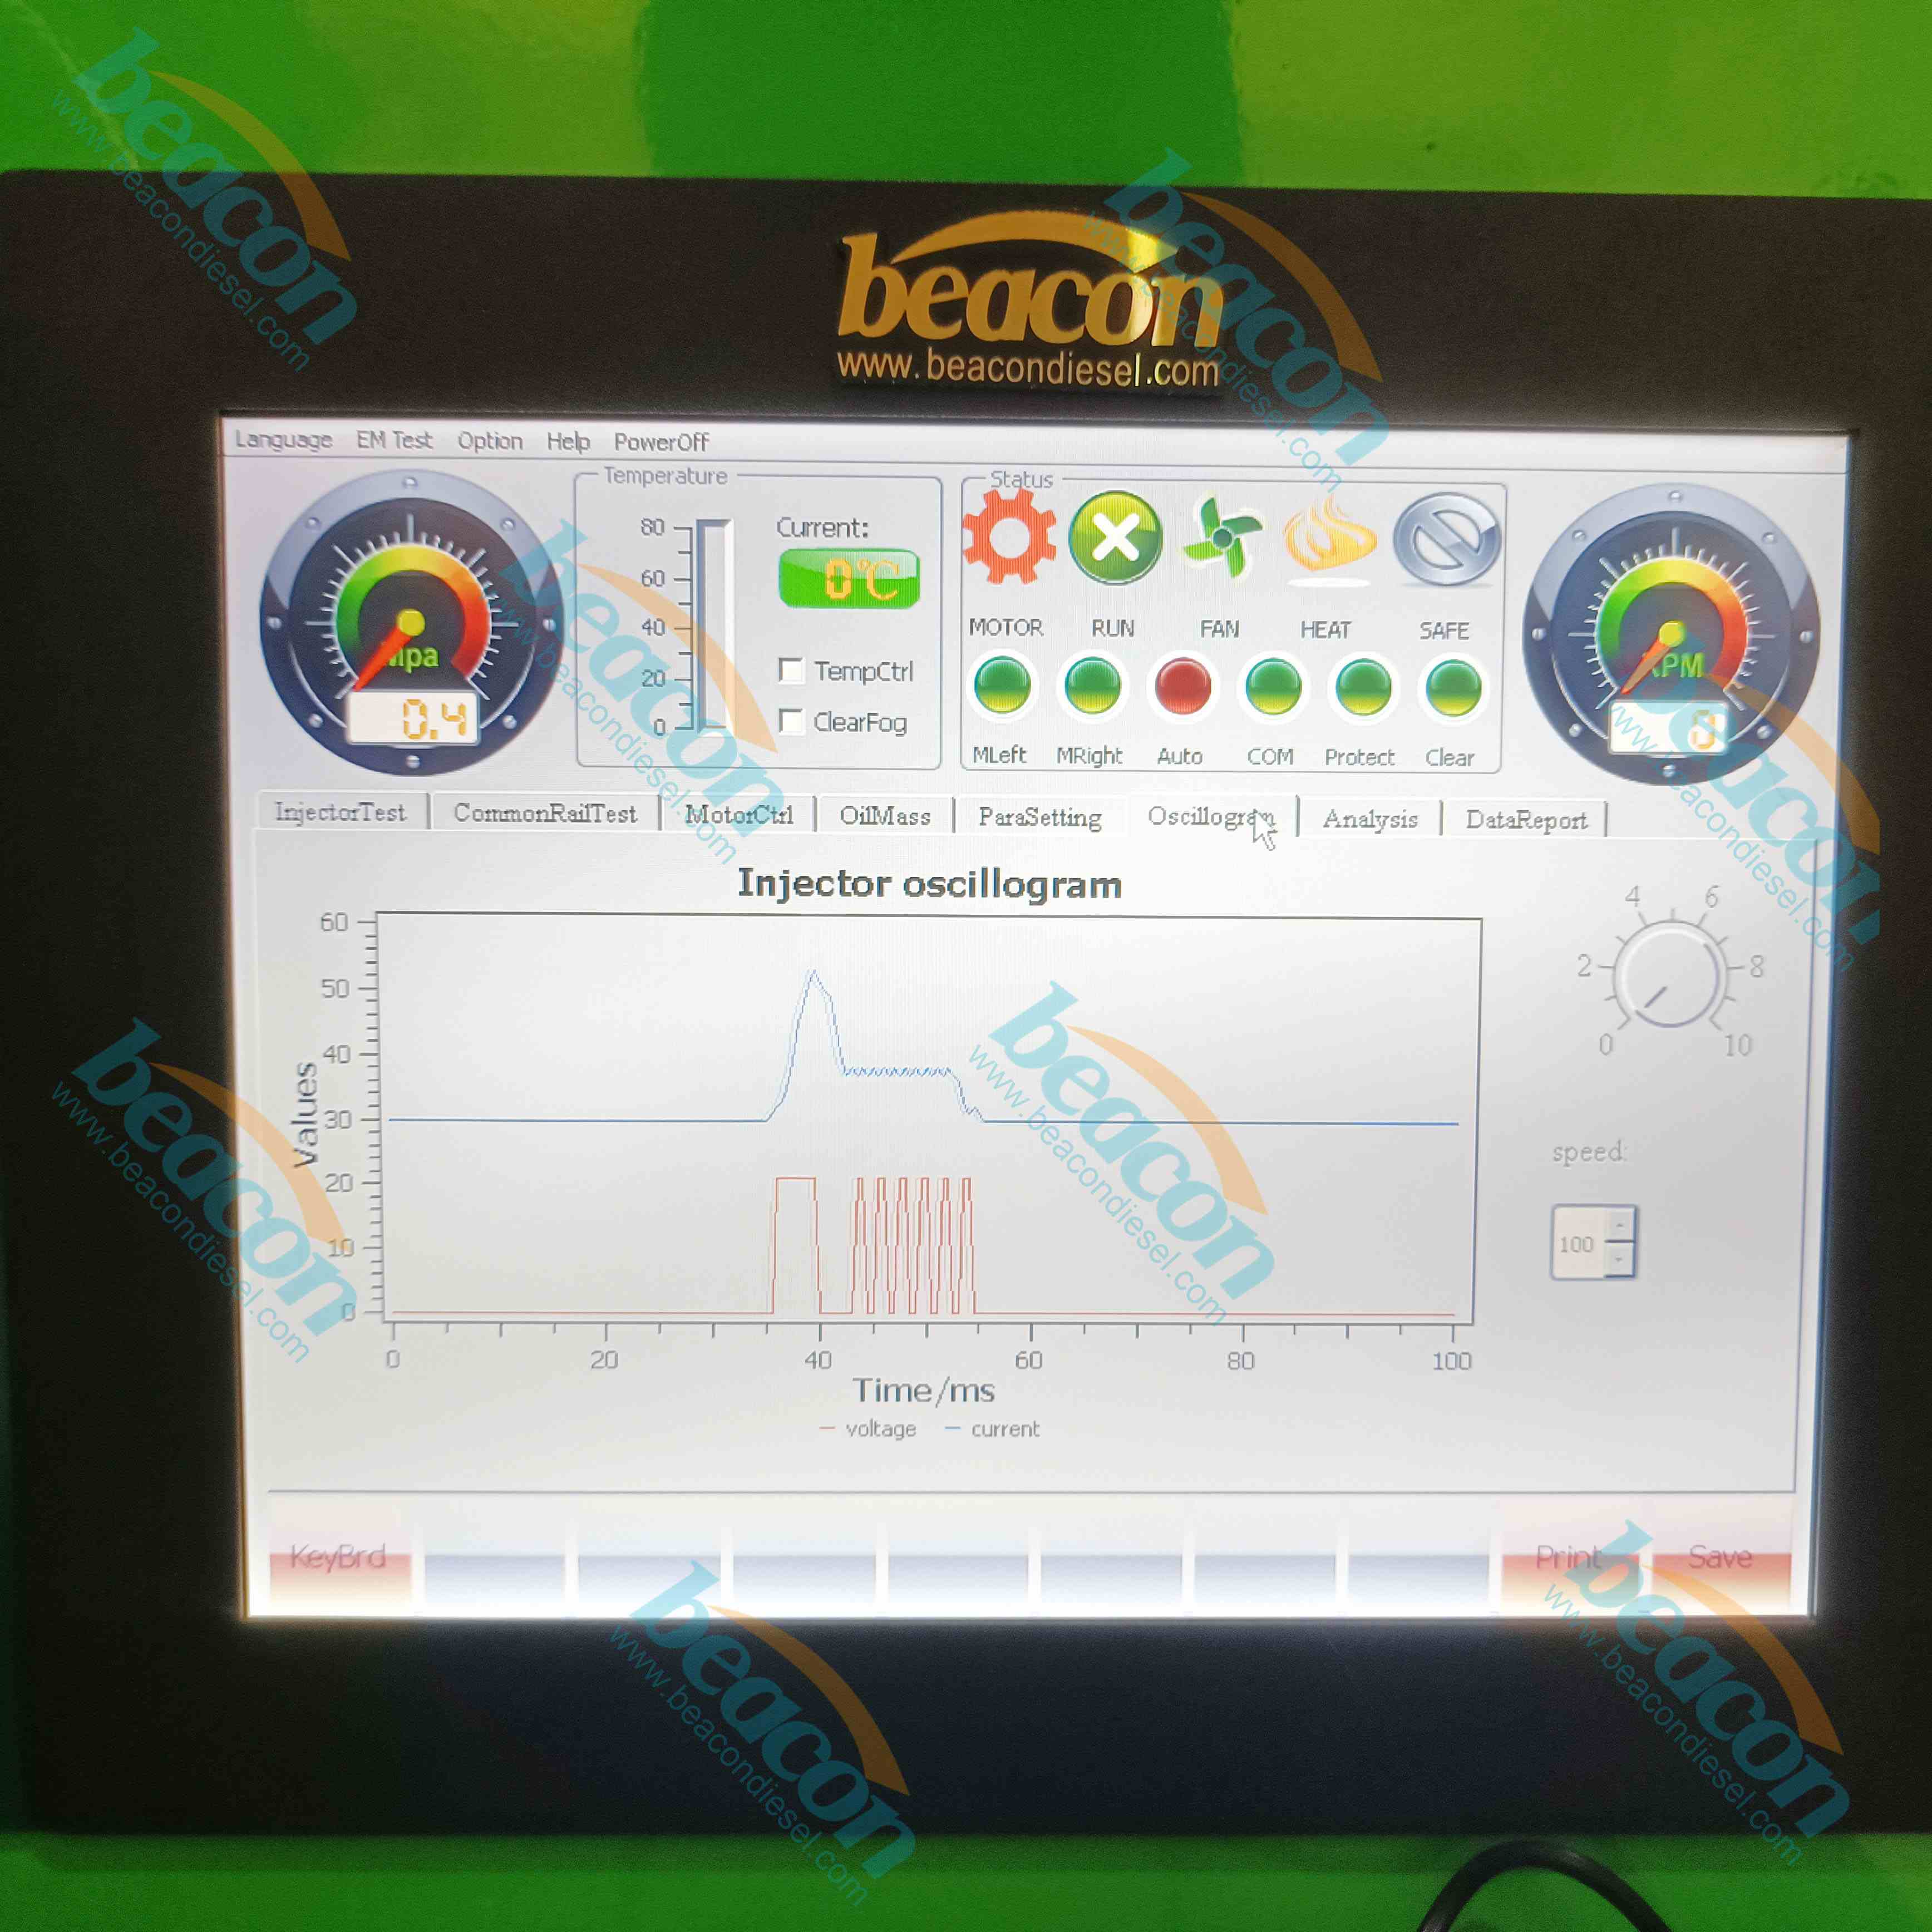 EPS117  CR Injector Tester Common Rail Injector Test Bench Diesel Fuel Injector Testing Machine